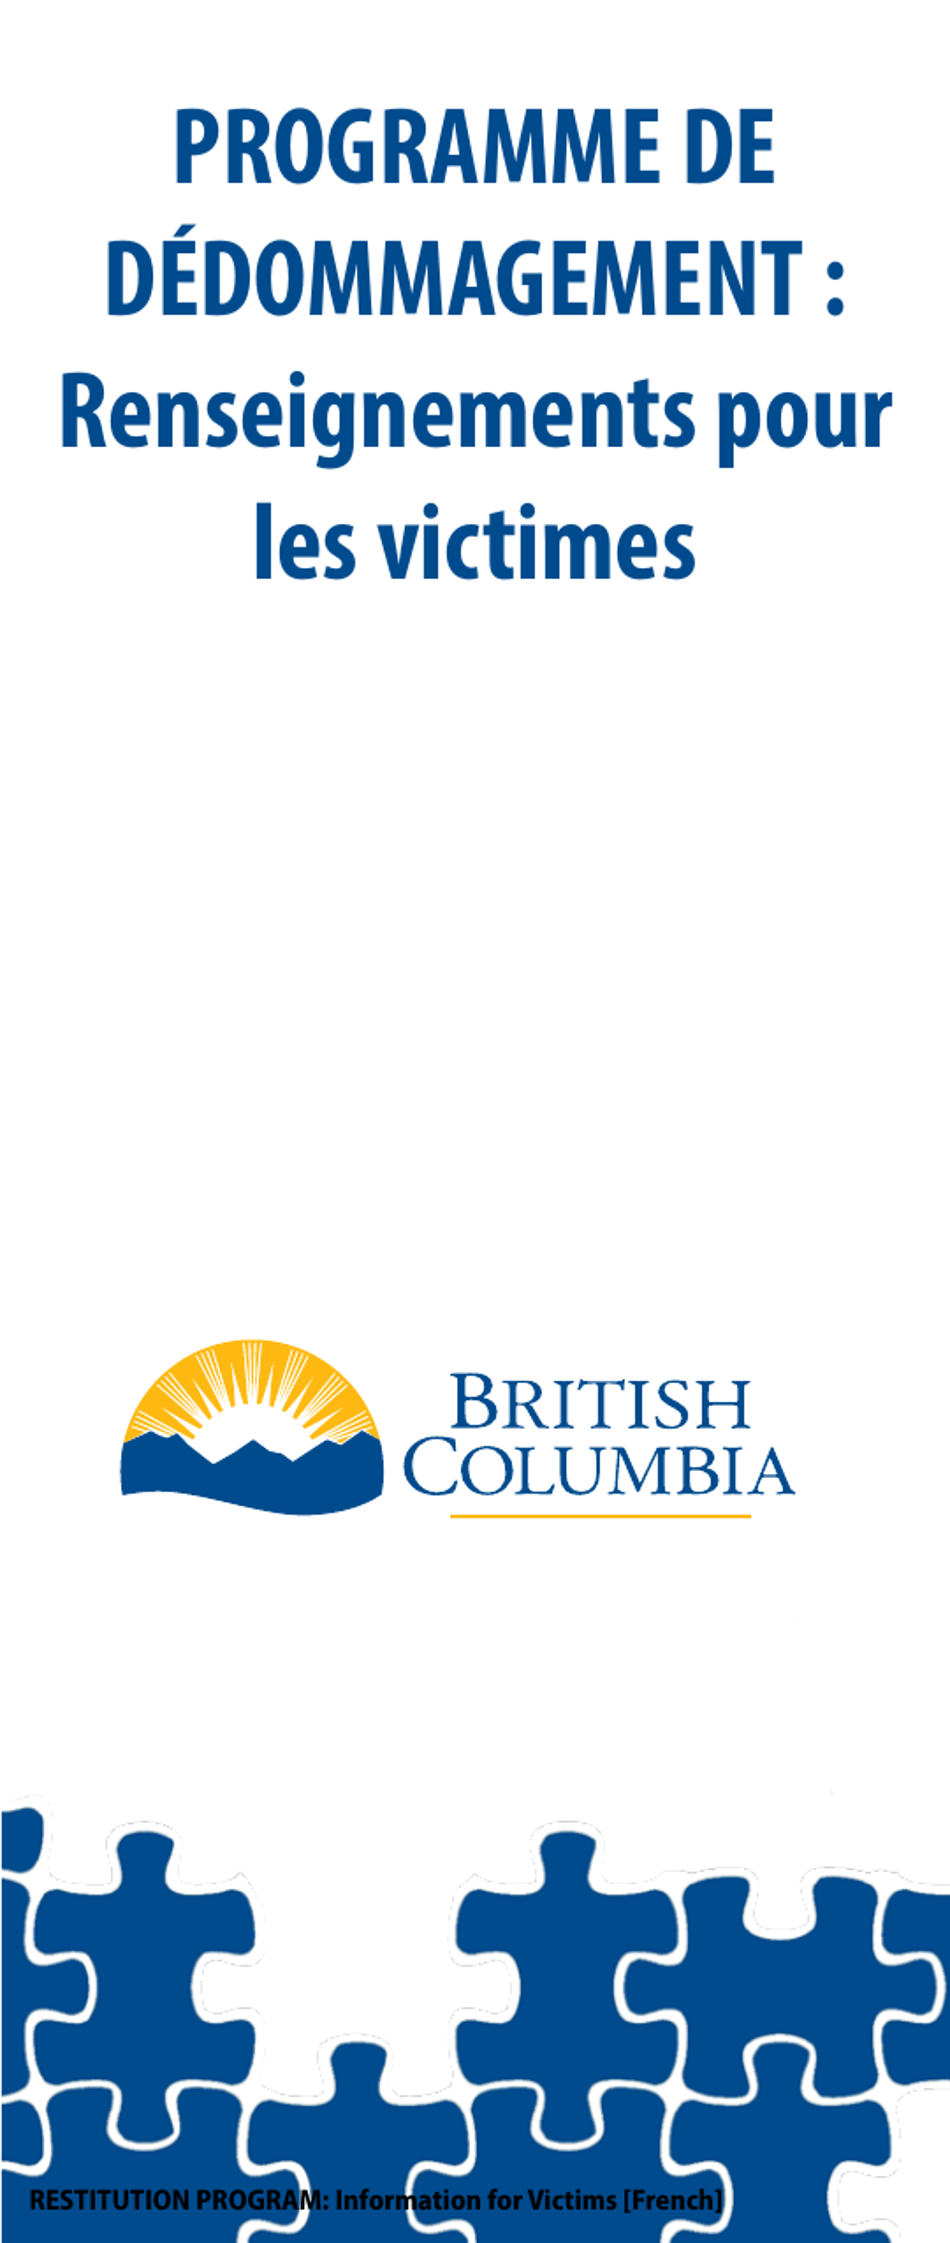 Restitution Program Application Form - British Columbia, Canada (English / French), Page 1